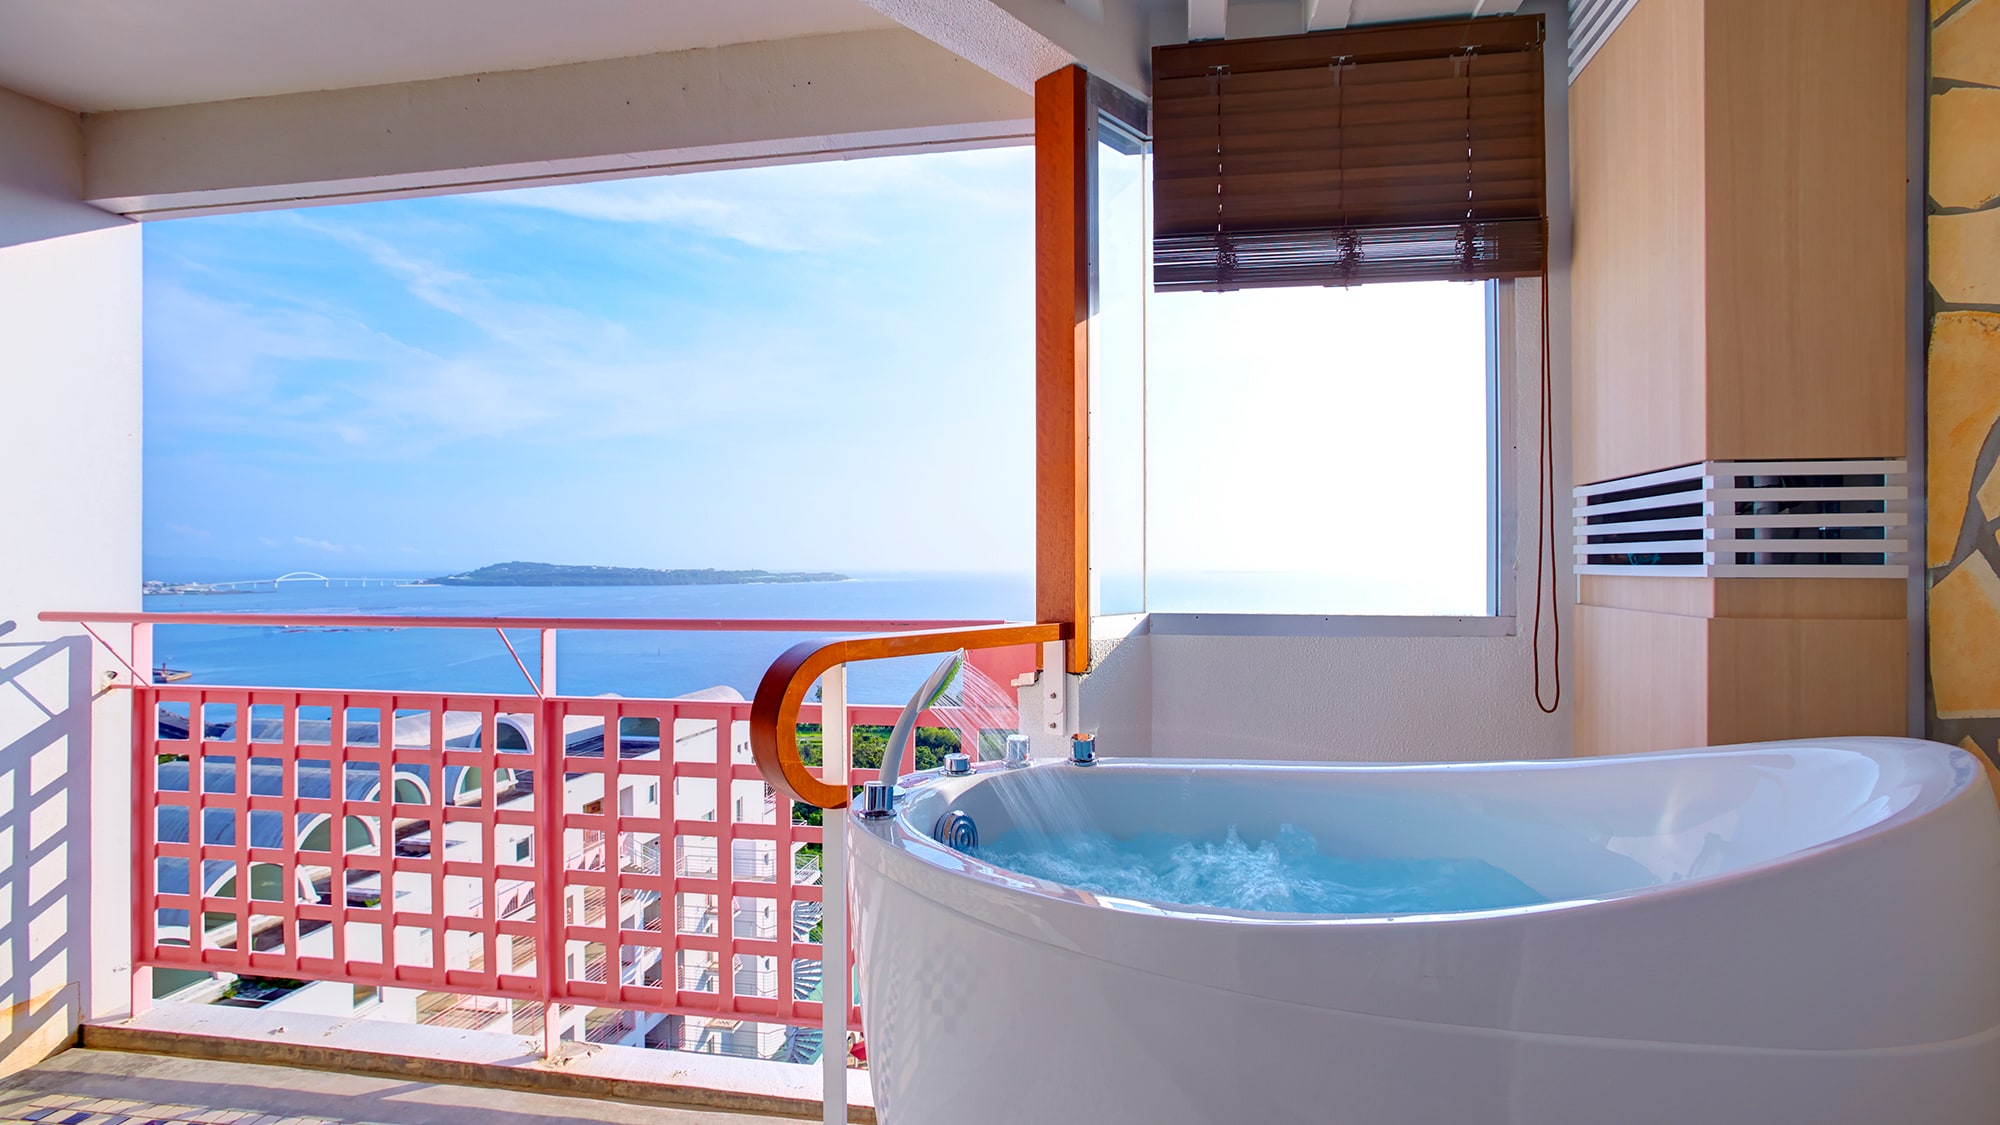 [Ocean Premier Western Room + View Bath] Premium twin room. Equipped with a view bath on the balcony. special